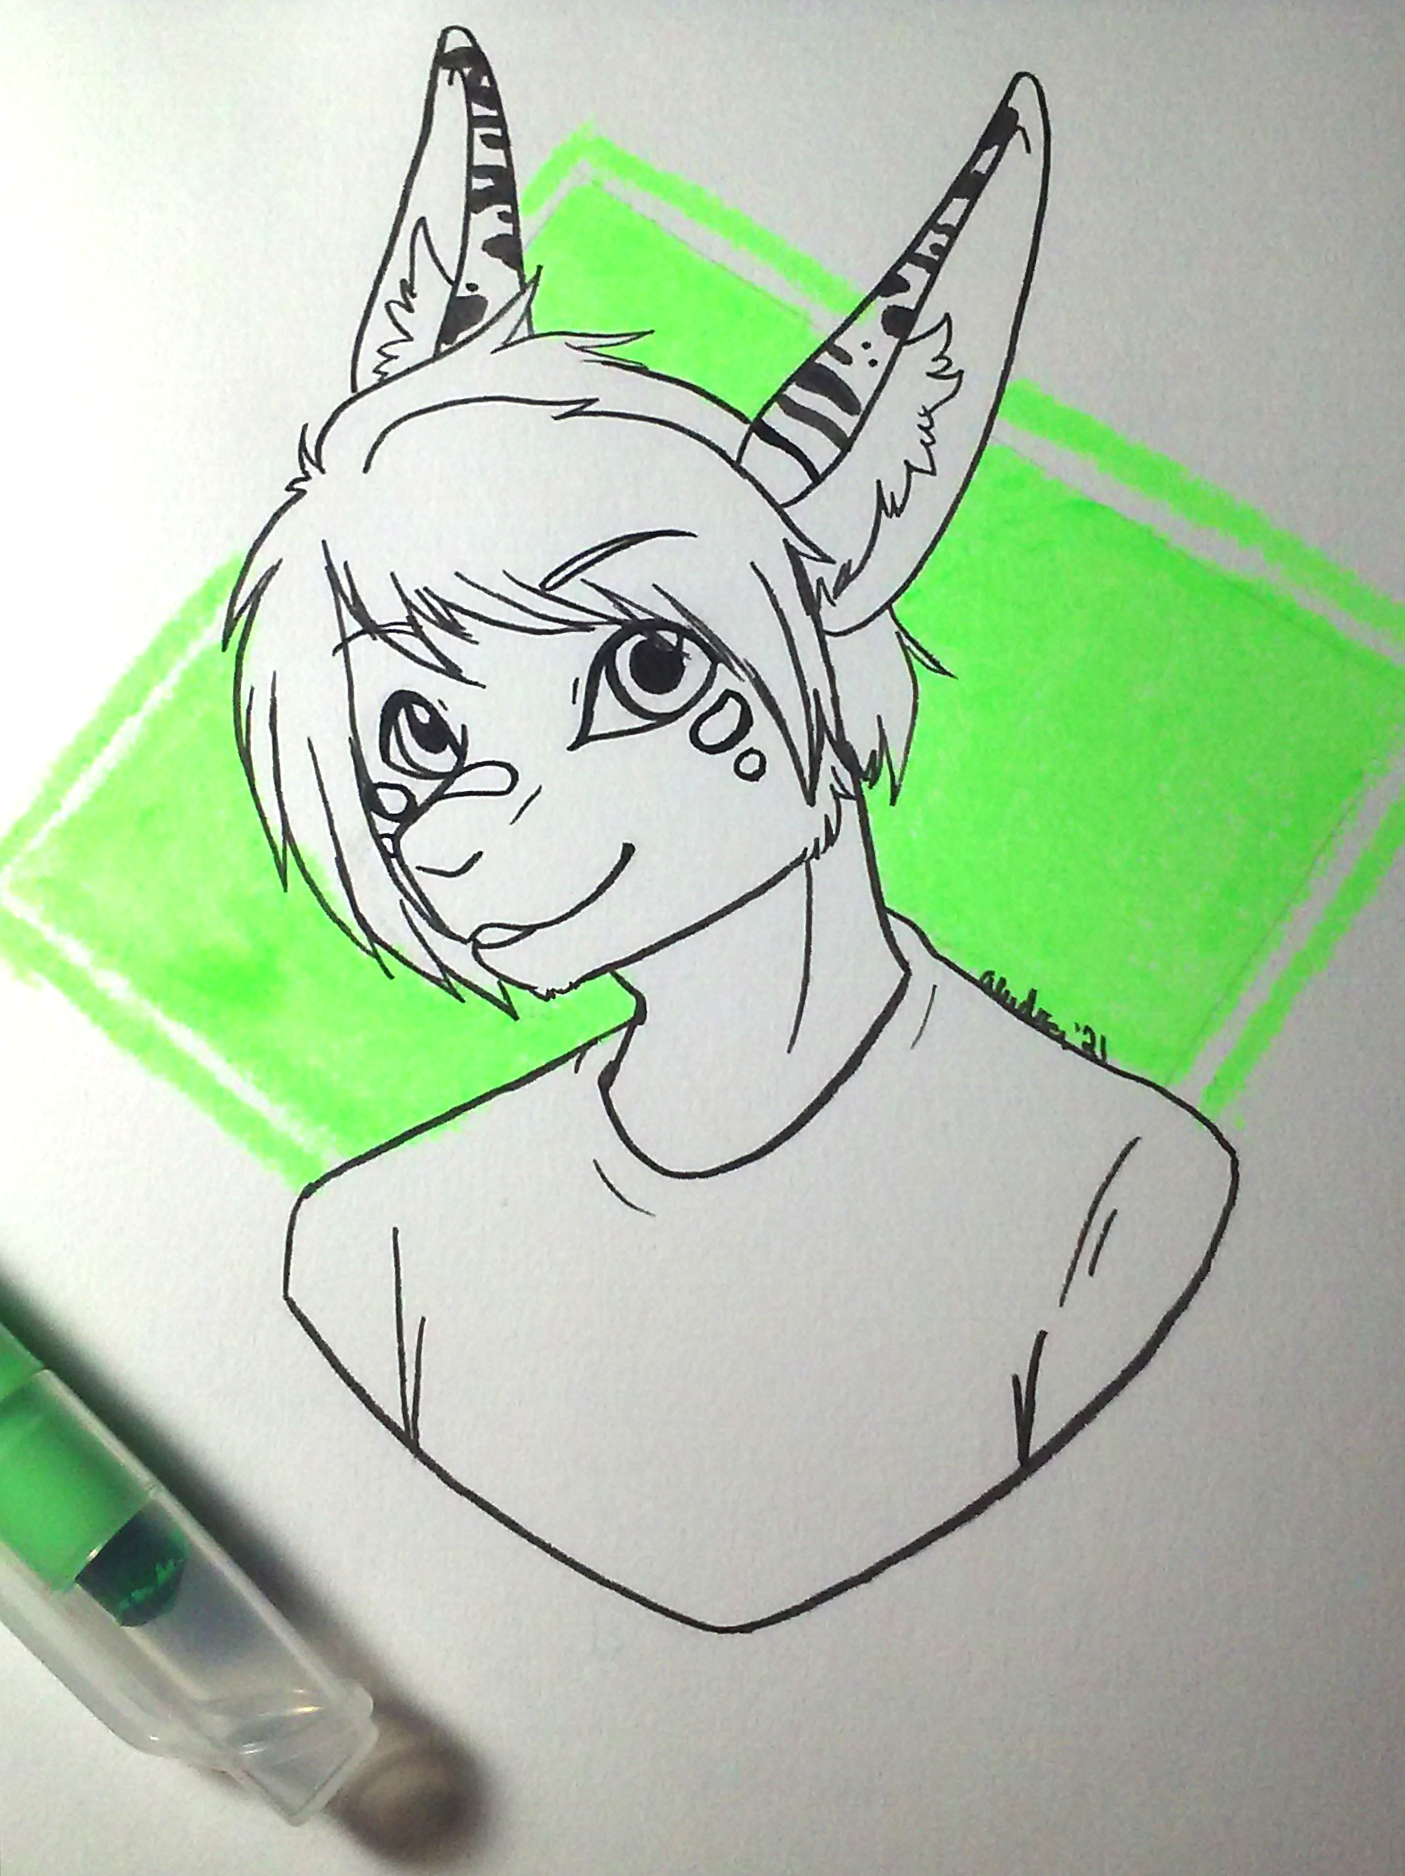 Quick sketch of Retro to test out some fancy gel highlighters.